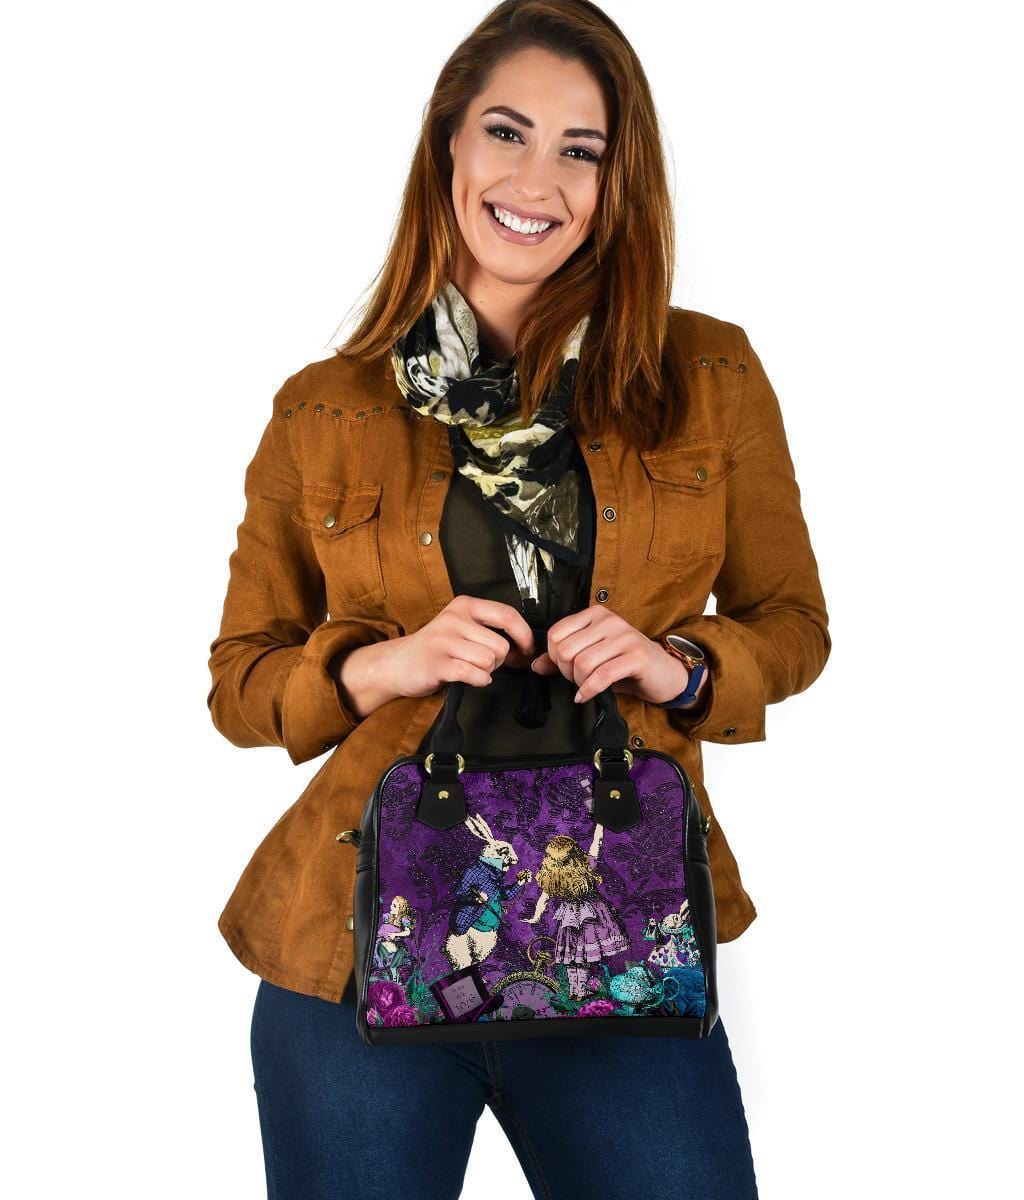 woman holding her birthday gift of the Gothic cute Alice in Wonderland vegan handbag on a purple damask pattern background